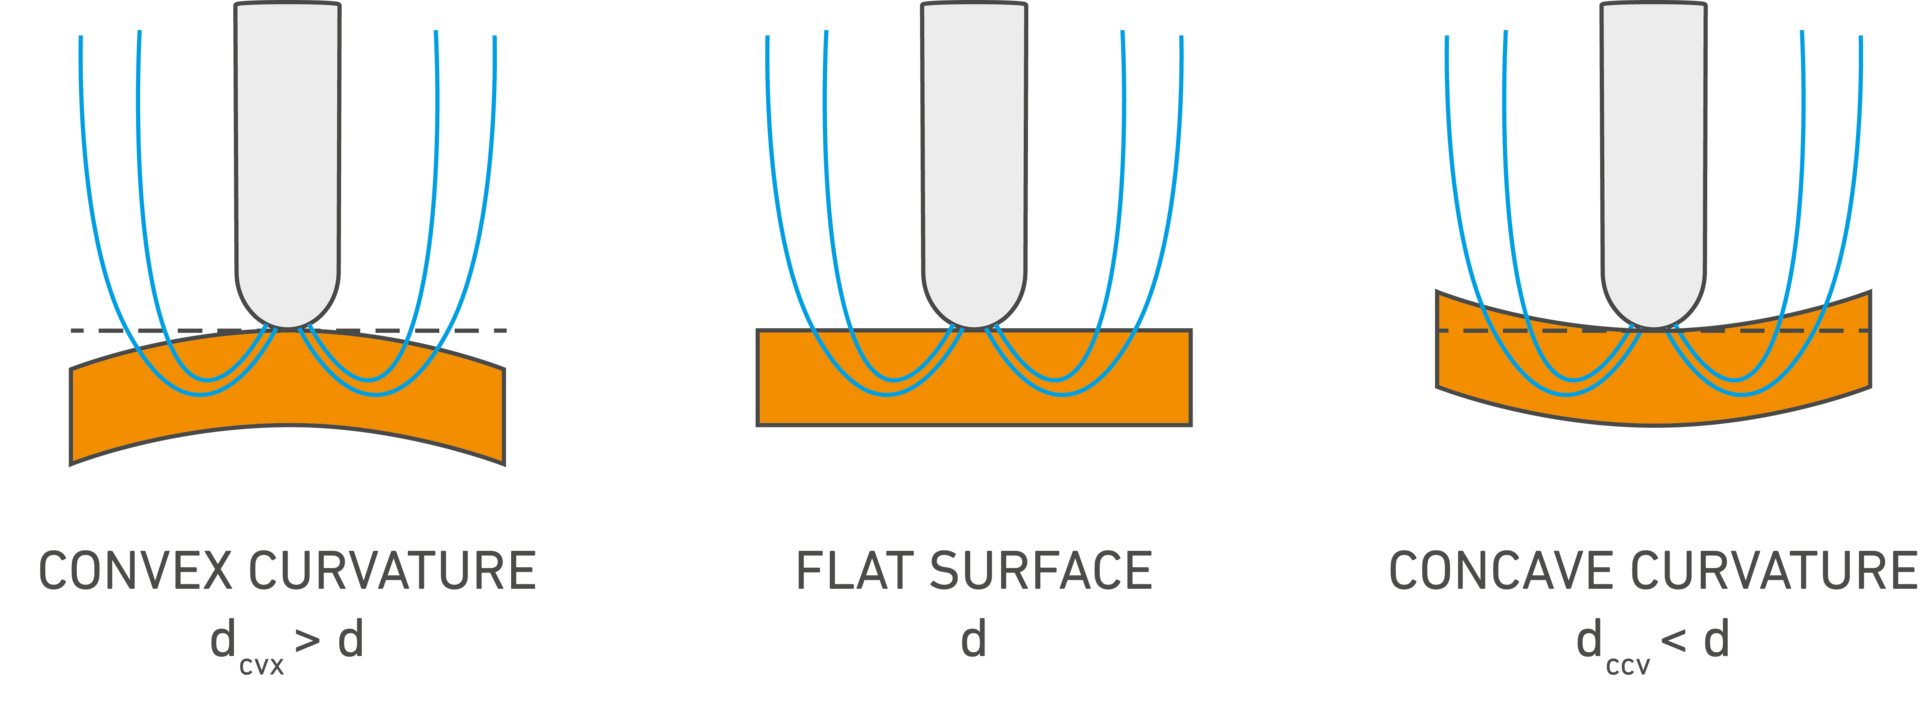 Application on curved surfaces